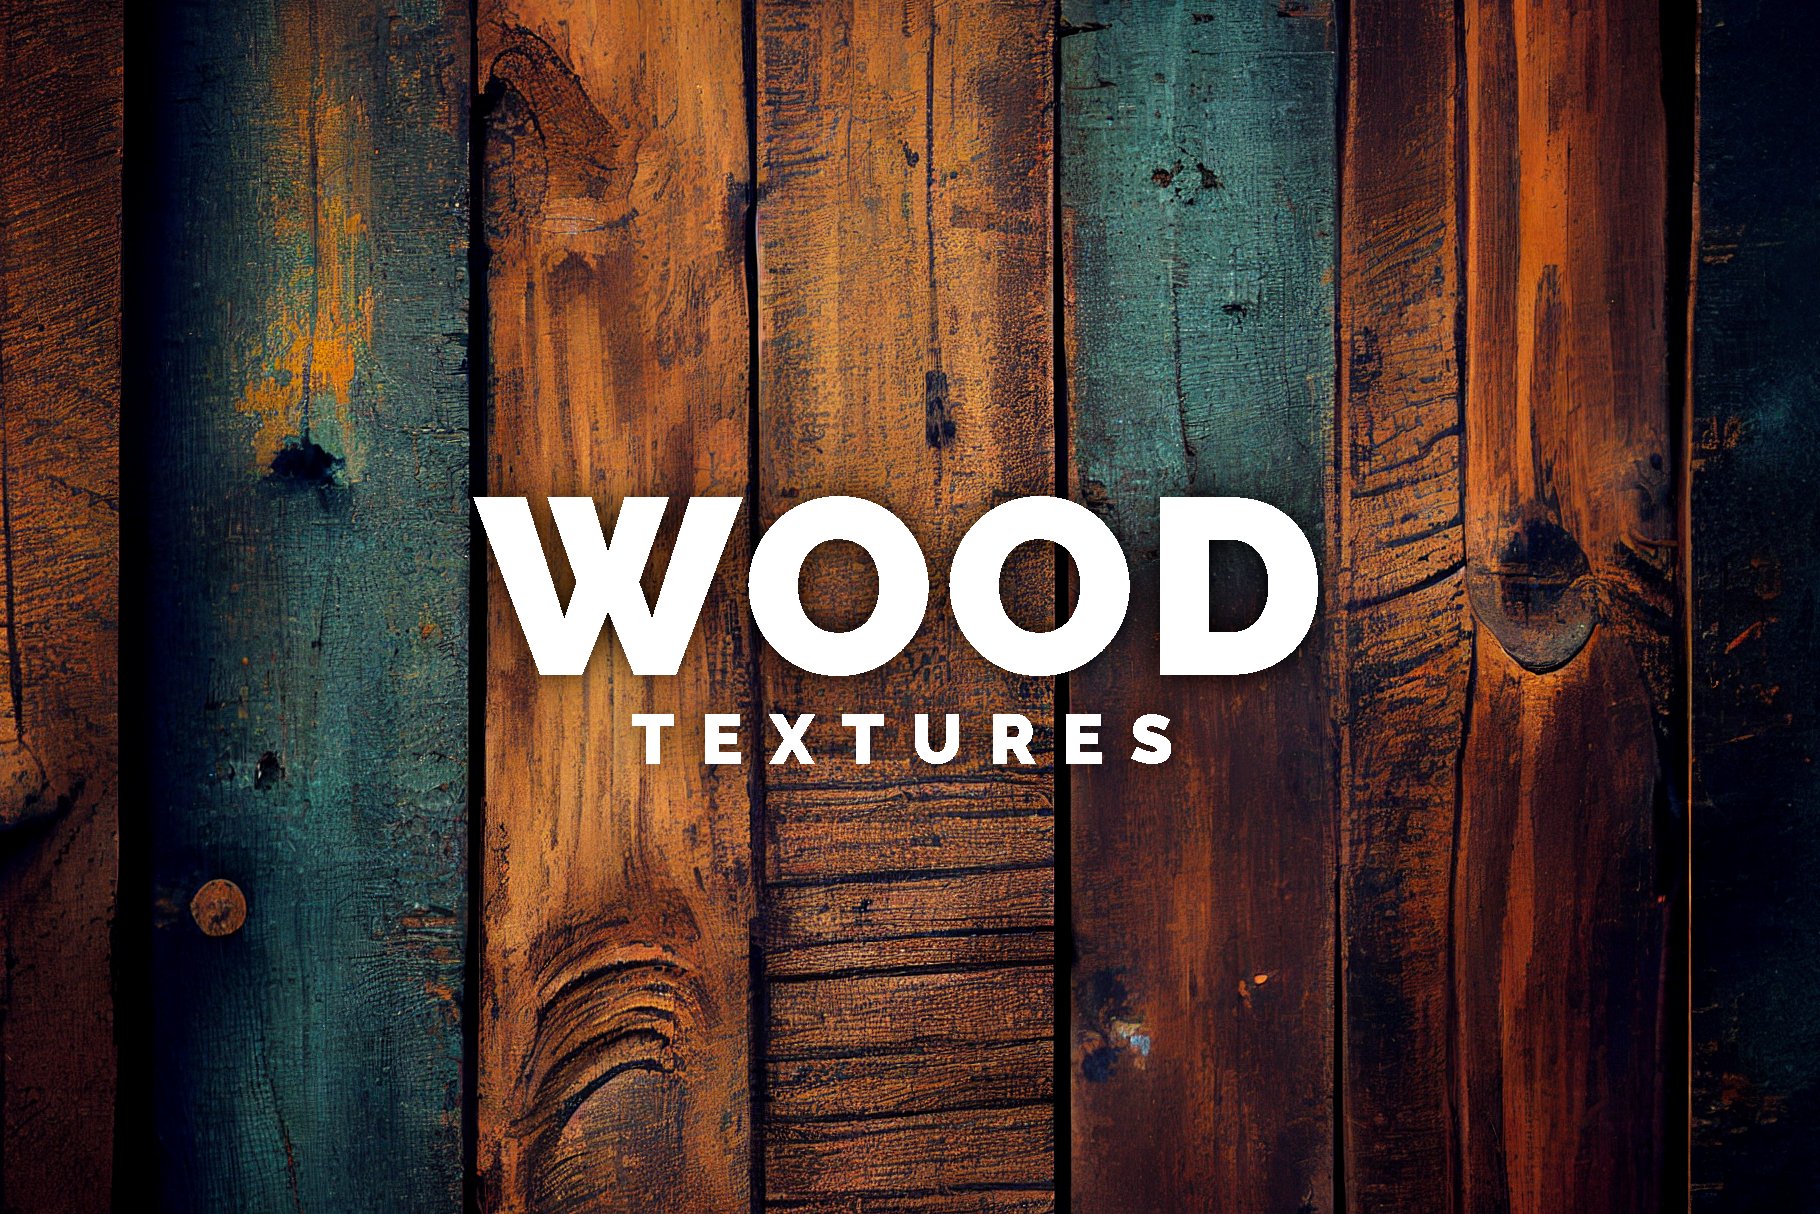 Wood Background Textures V1 cover image.